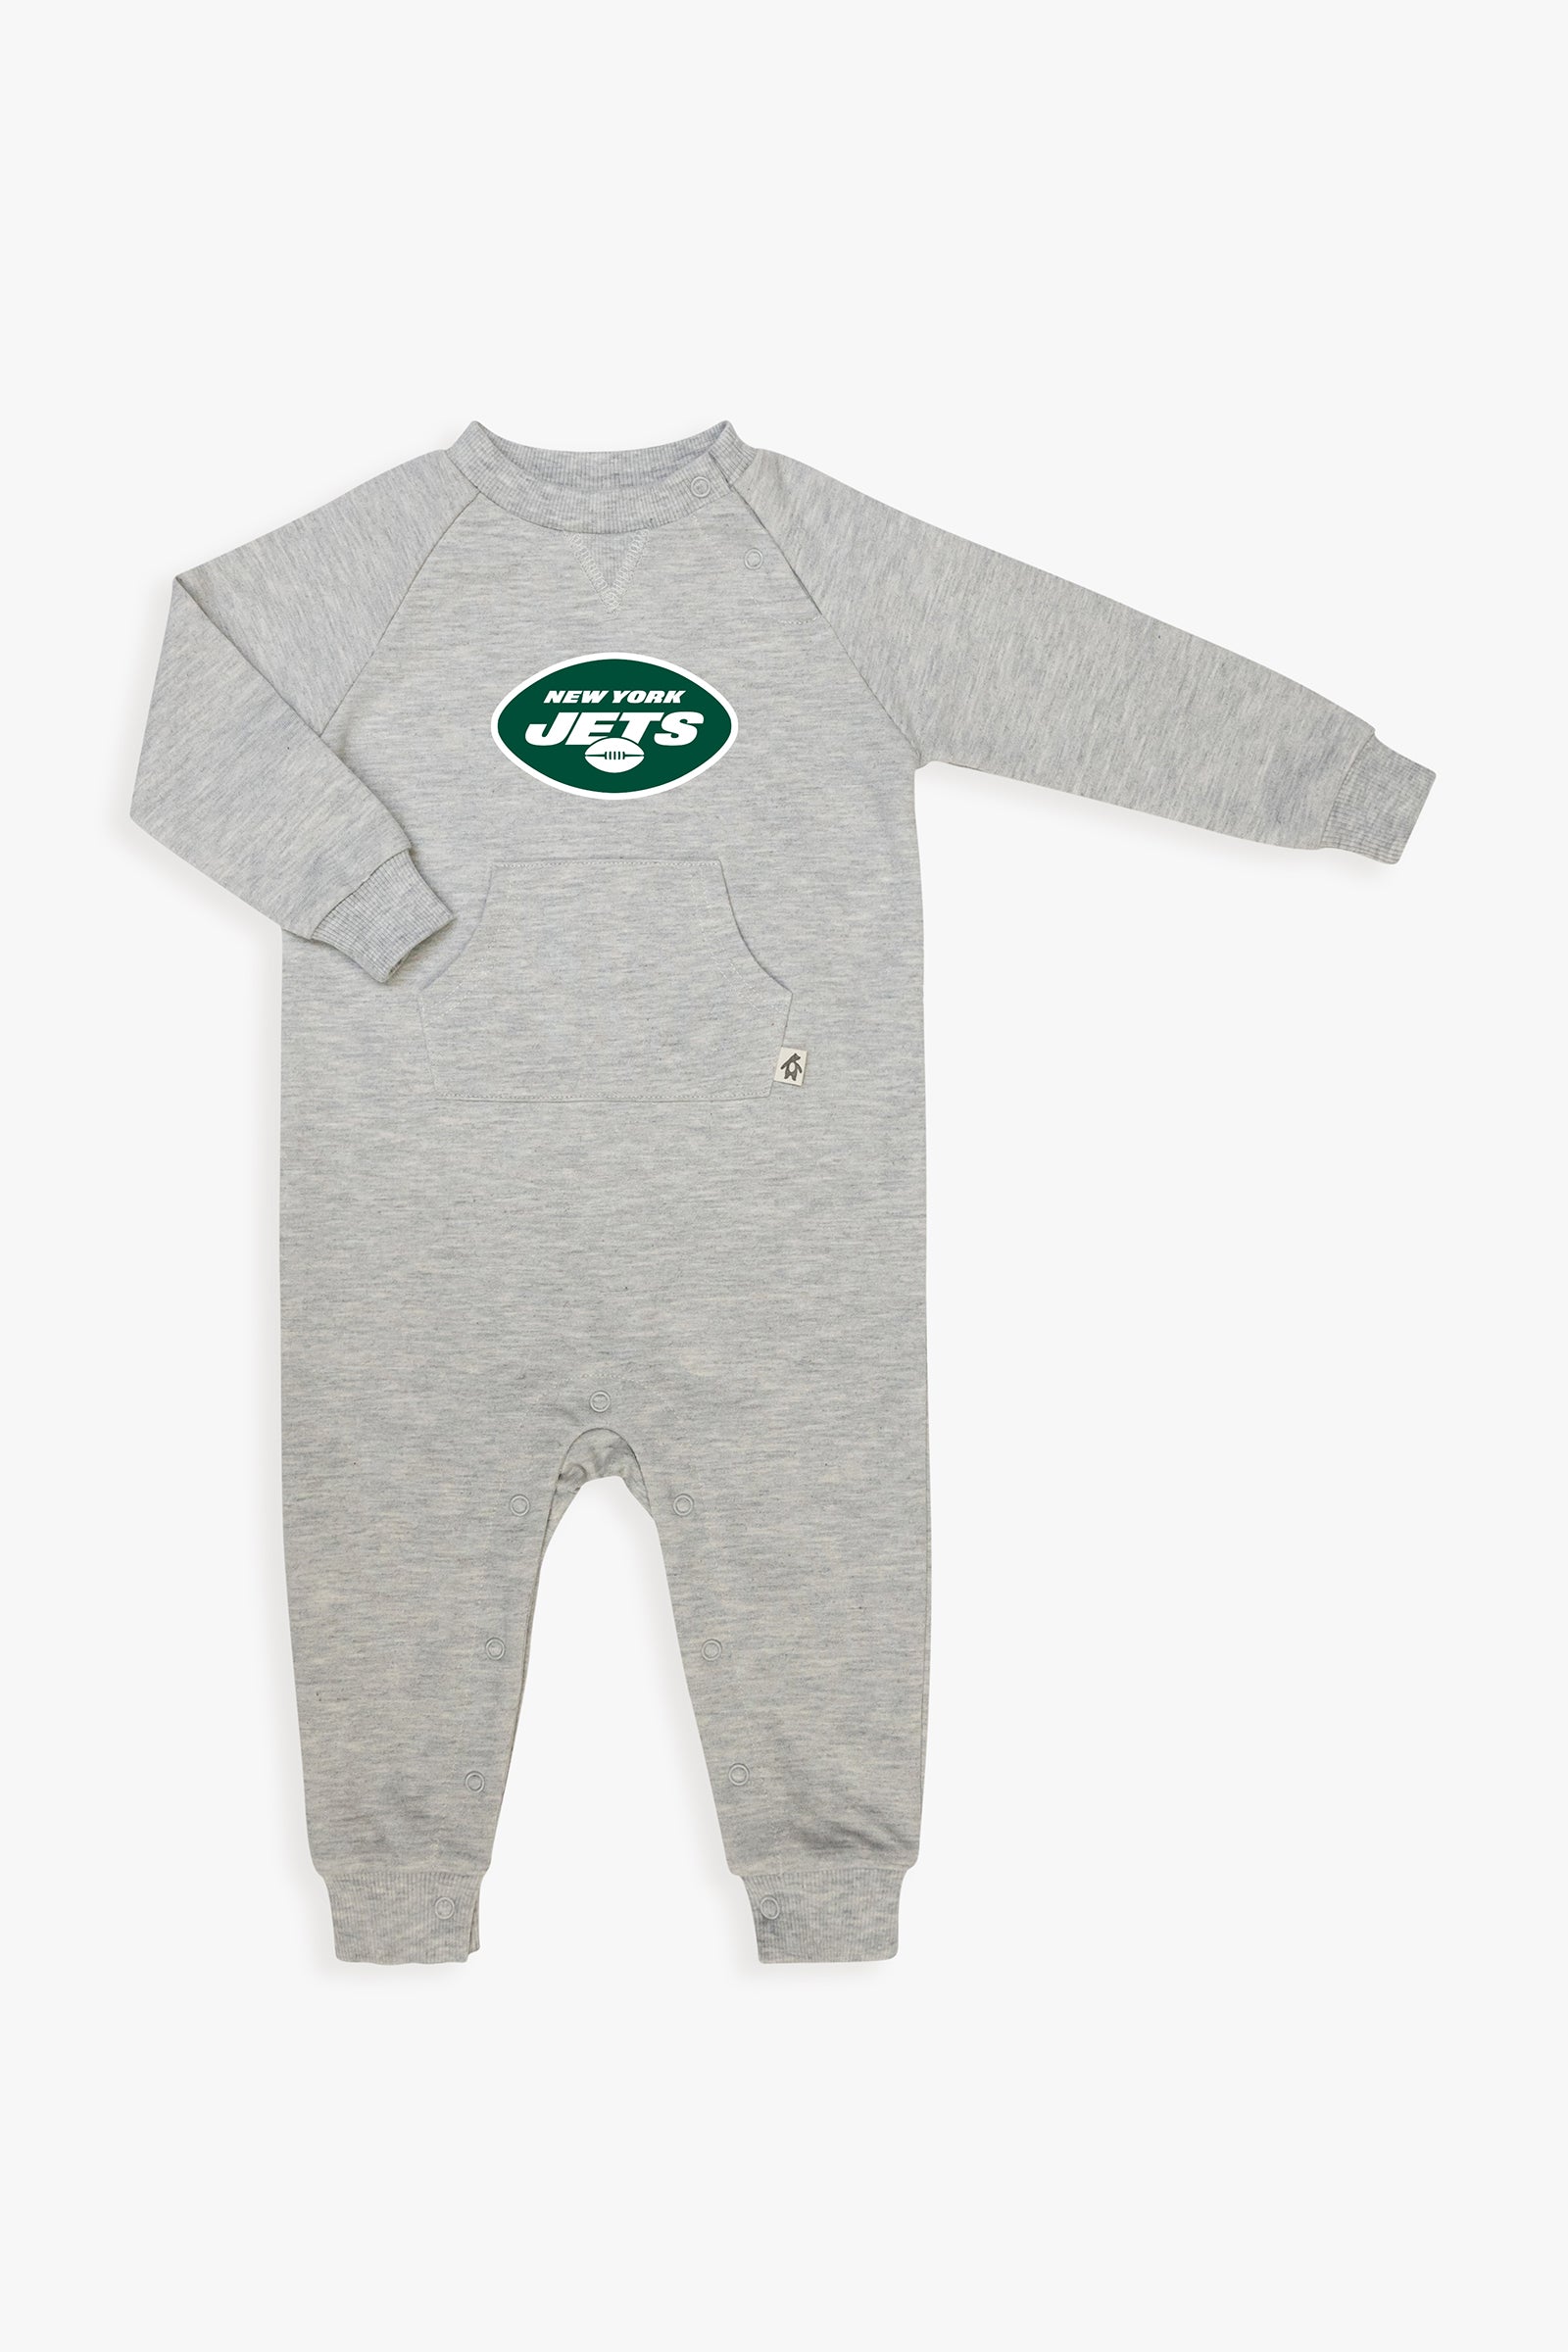 Gertex NFL Toddler French Terry Jumpsuit in Grey